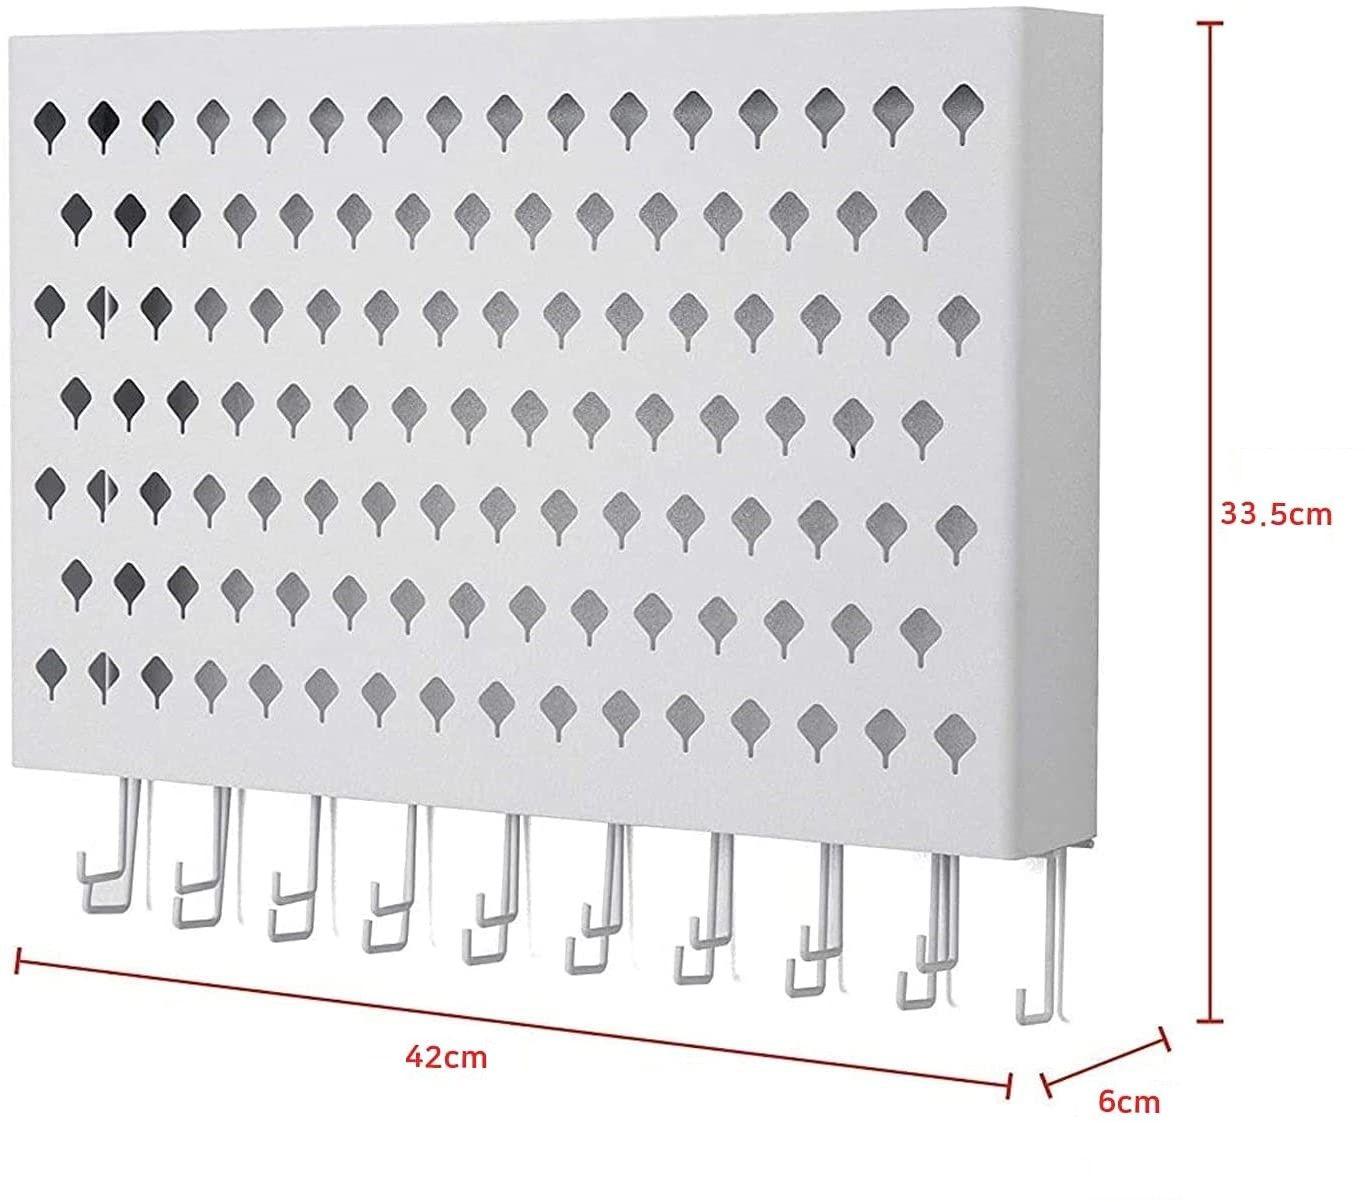 Wall Mount Earring Jewelry Hanger Organizer Holder with 109 Holes and 19 Hooks (White)